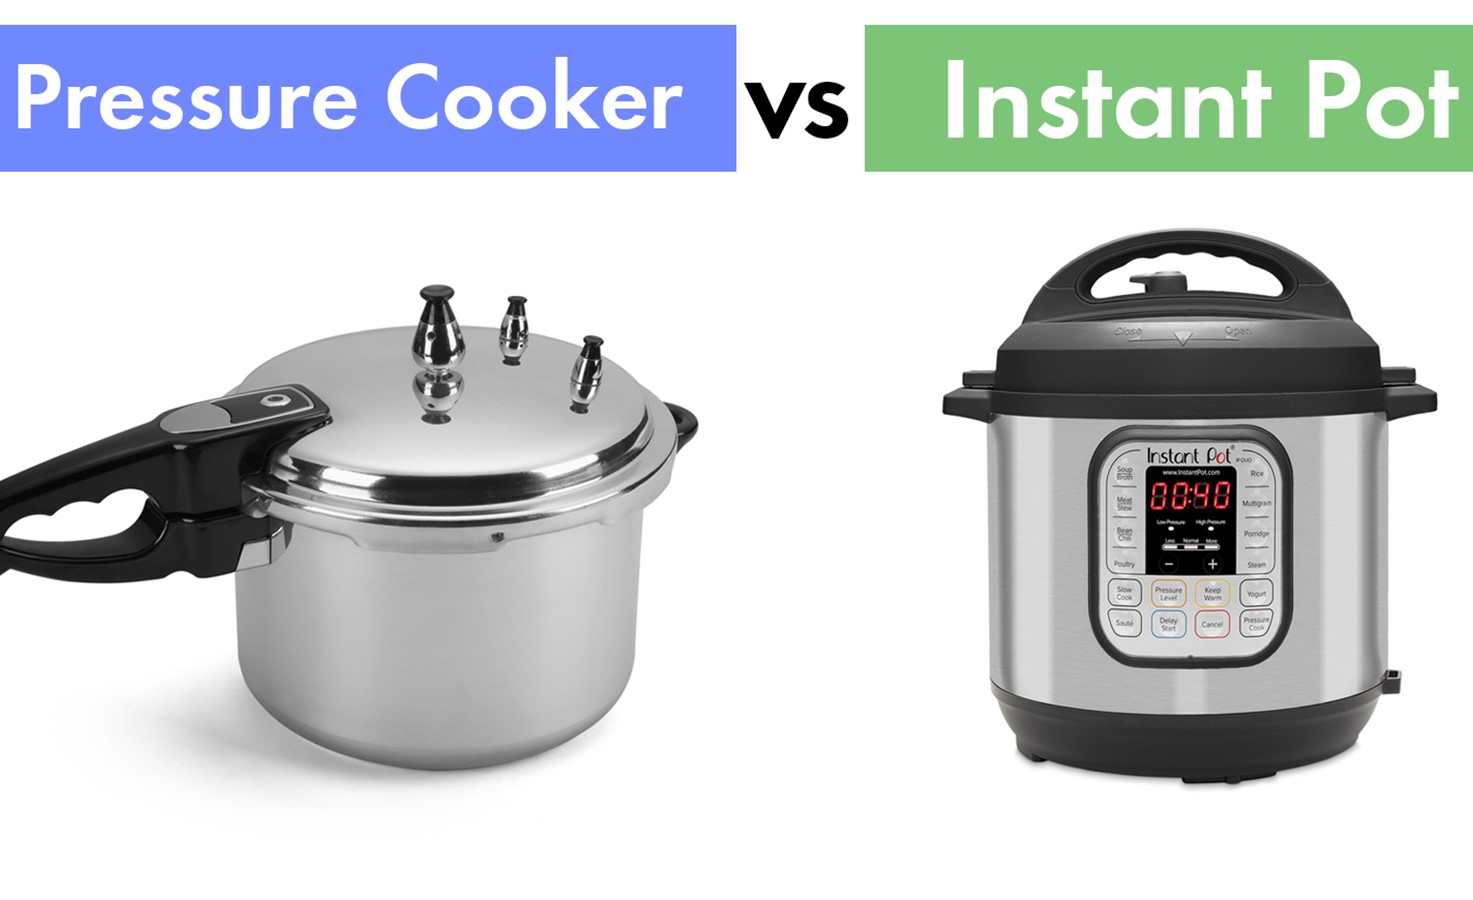 7-in-1 Pressure Cooker Vs. Instant Pot: What’s The Difference?